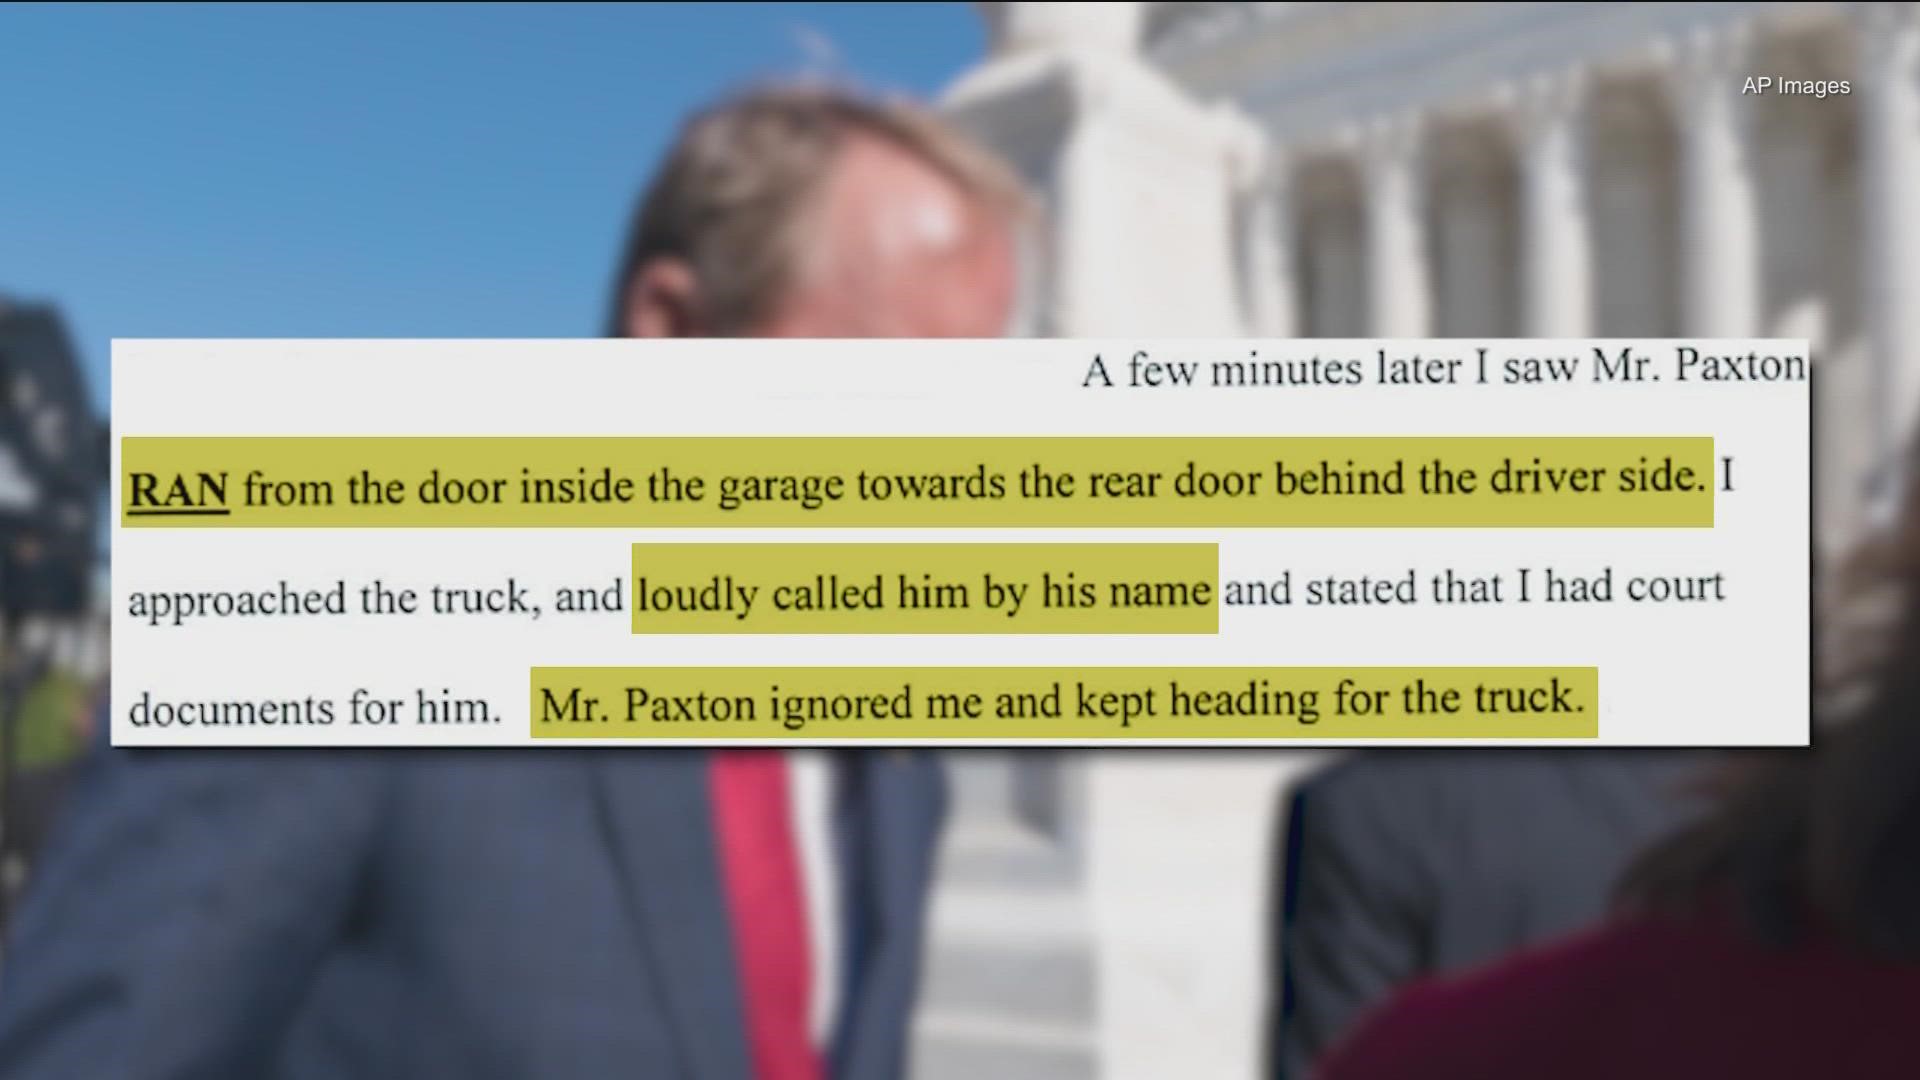 Paxton was seen leaving his home after being served a subpoena according to court documents. KVUE's Natalie Haddad has more.